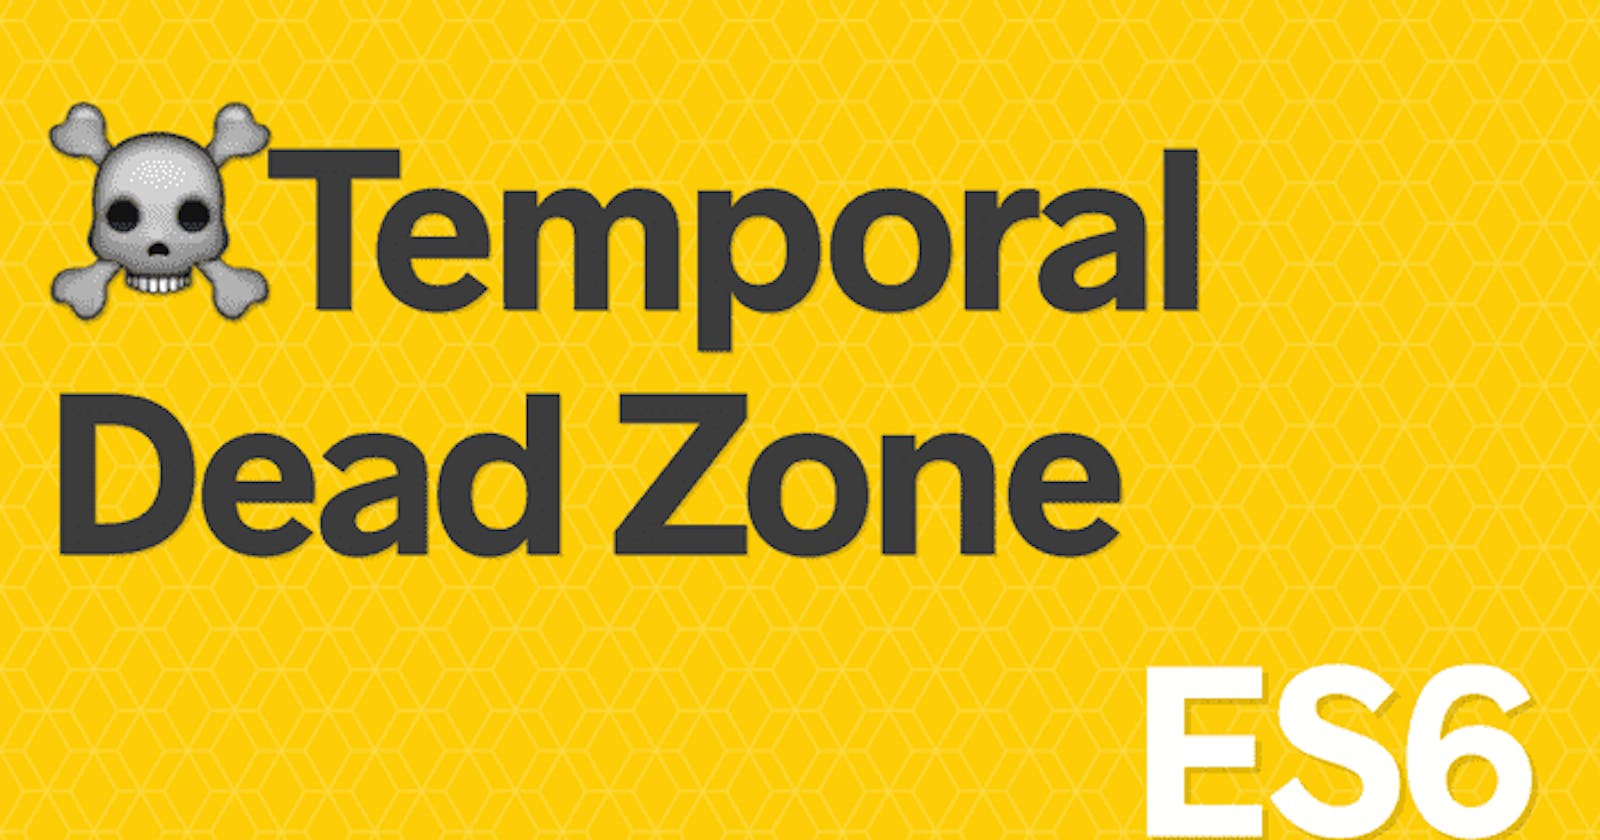 What is Temporal Dead Zone in Javascript?